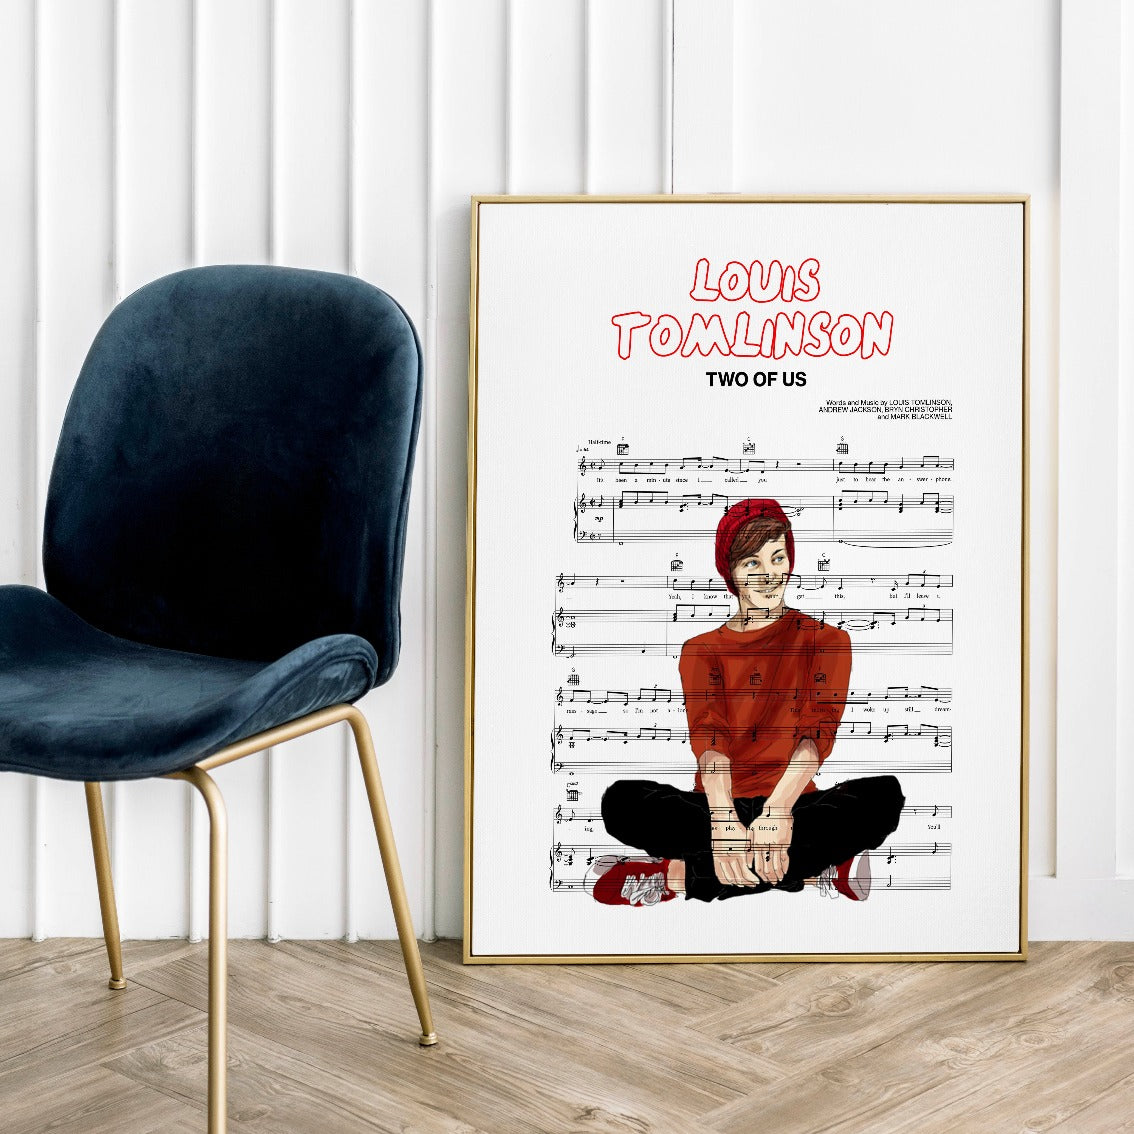 Wall art print to inspire you. This poster is a great way to show your love for music and for one of the biggest bands in the world. The simple and stylish design is perfect for any room in your home. The high-quality print will look great on your wall for years to come.